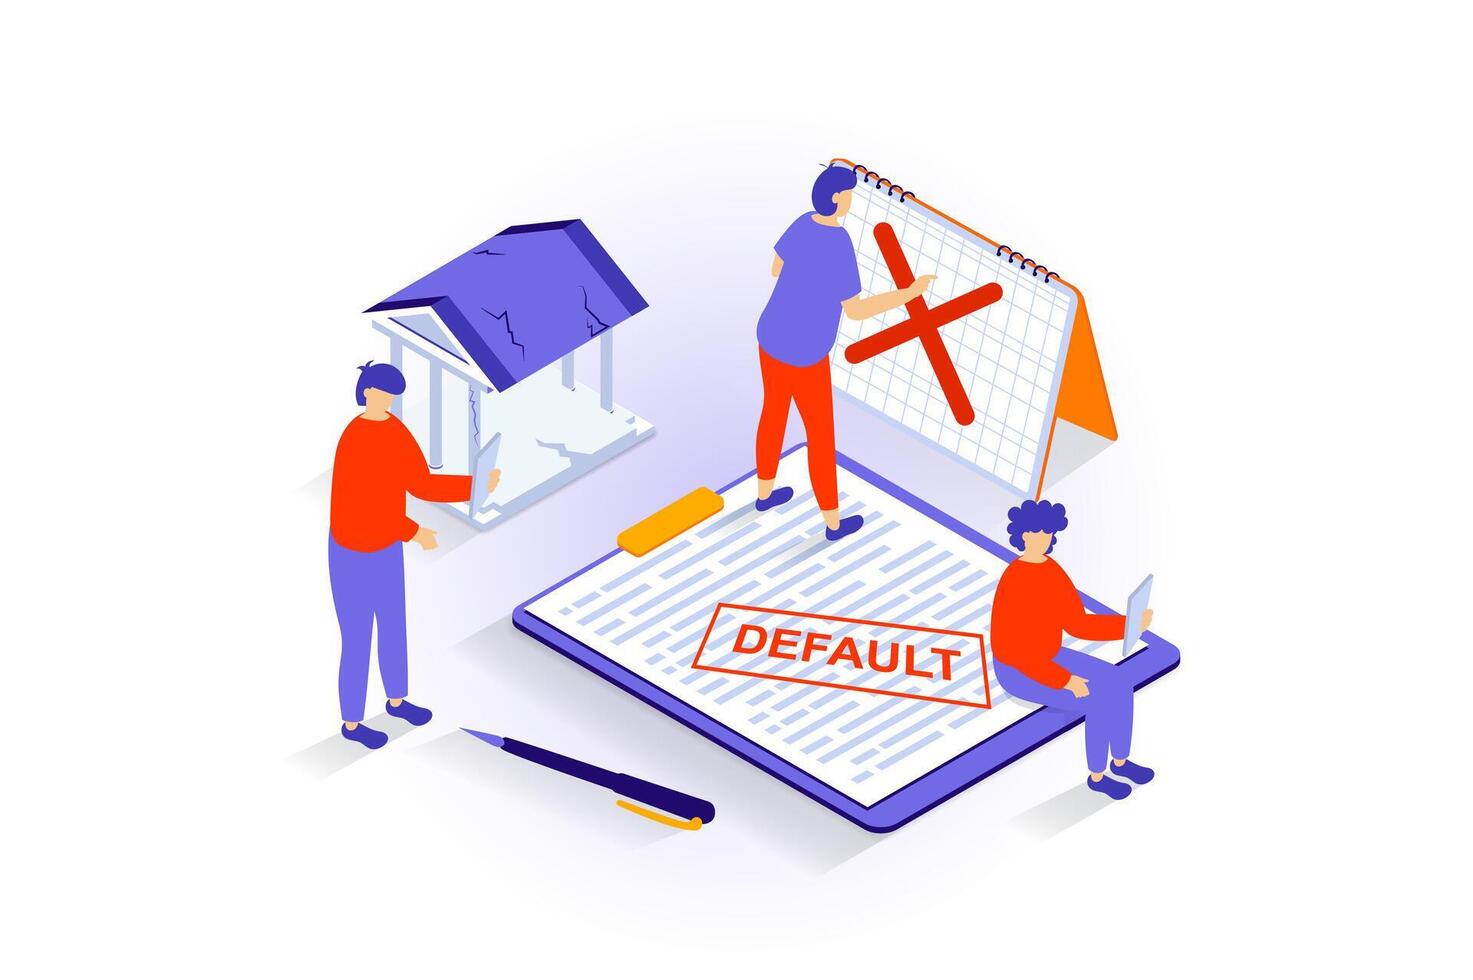 Unemployment and crisis concept in 3d isometric design. People have financial problems, lose business and jobs, get bankruptcy and default. Vector illustration with isometry scene for web graphic